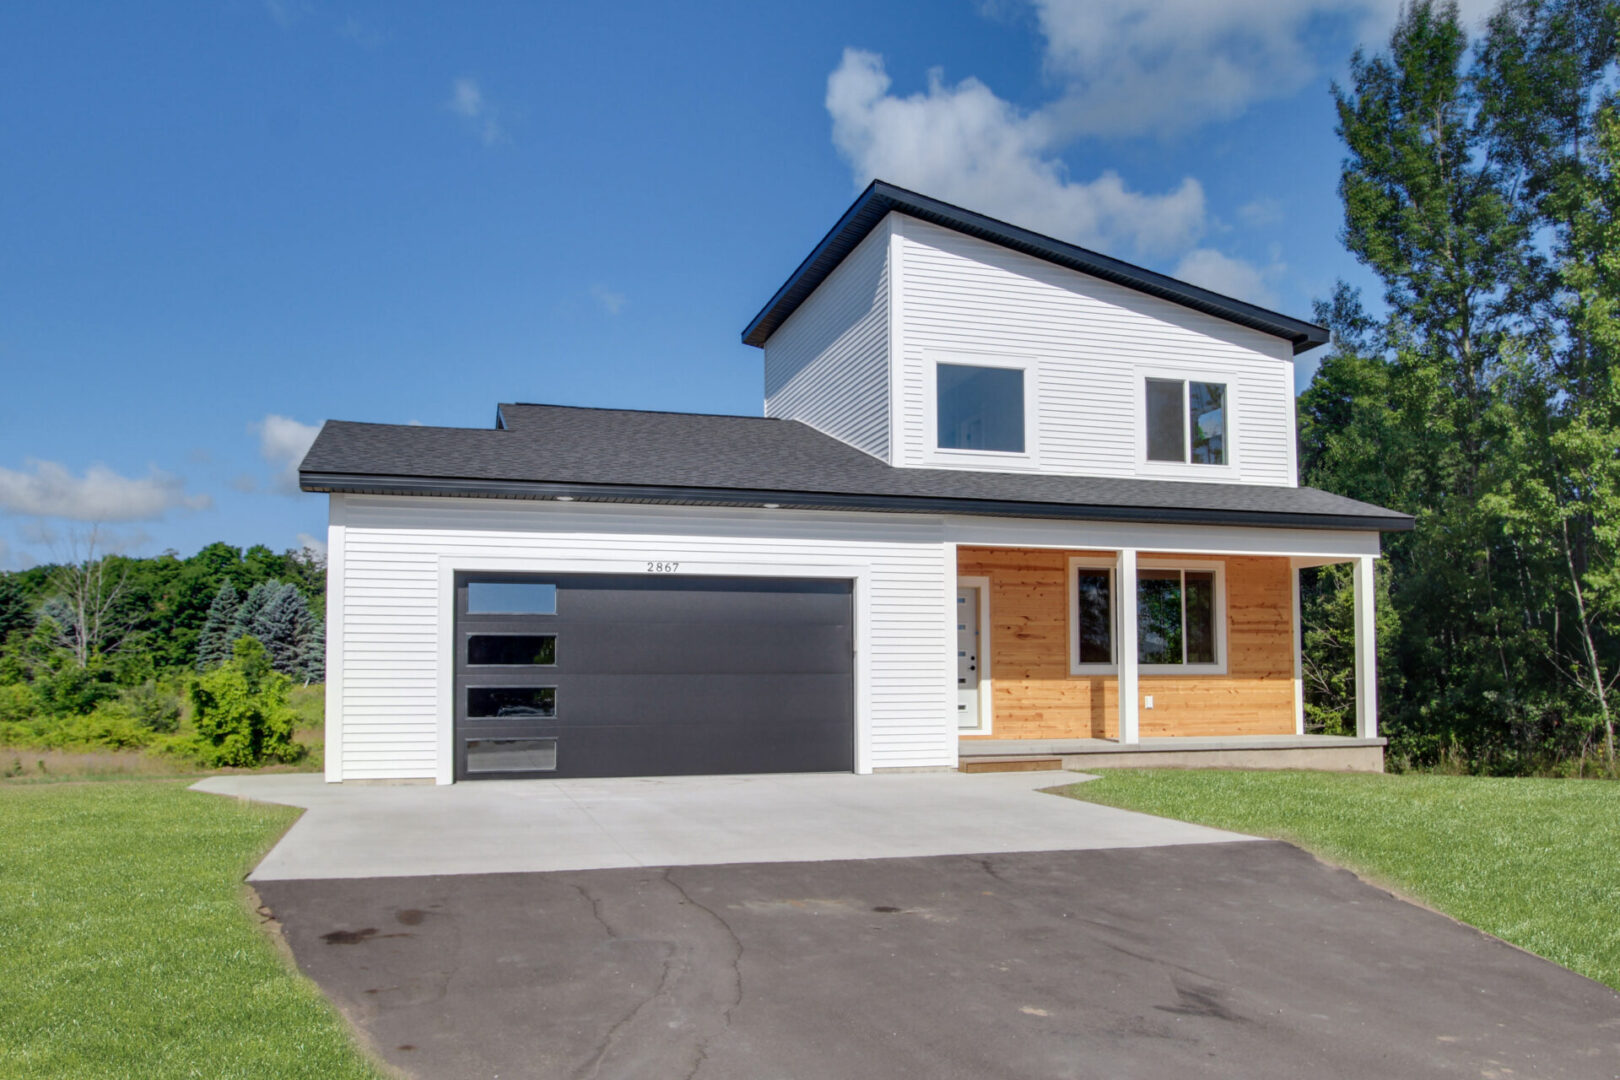 A two-story property with garage, white and wood exteriors